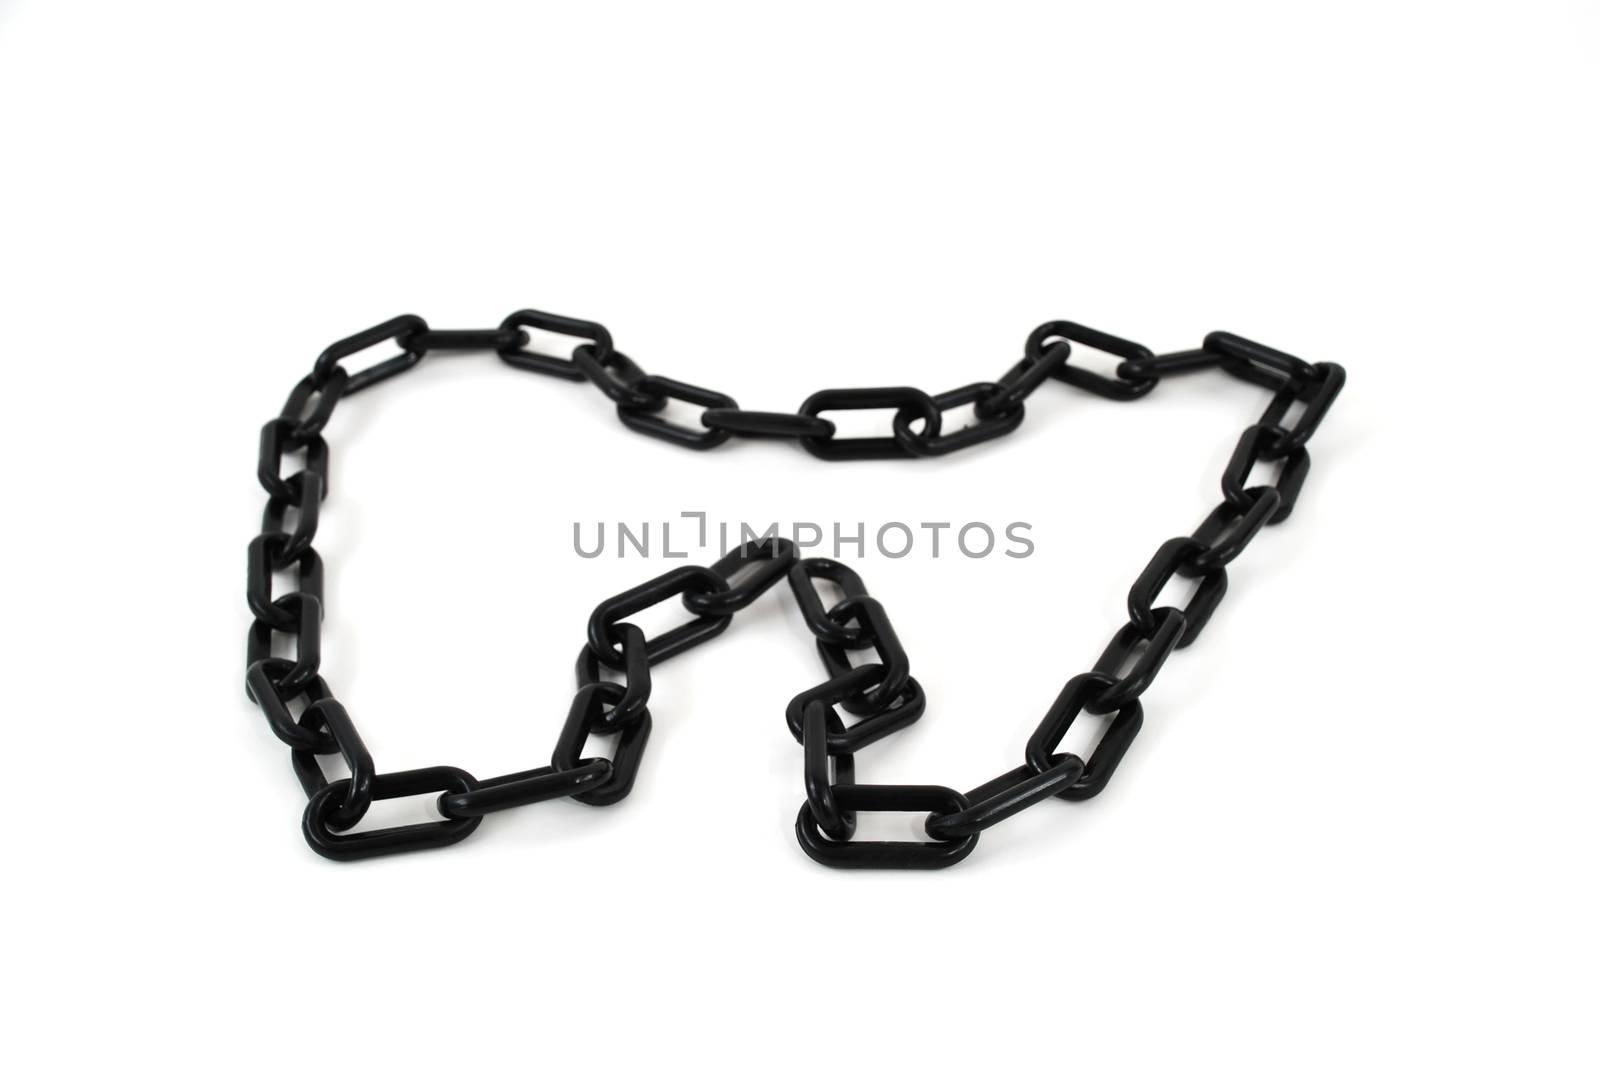 stock pictures of a lenght of a black chain